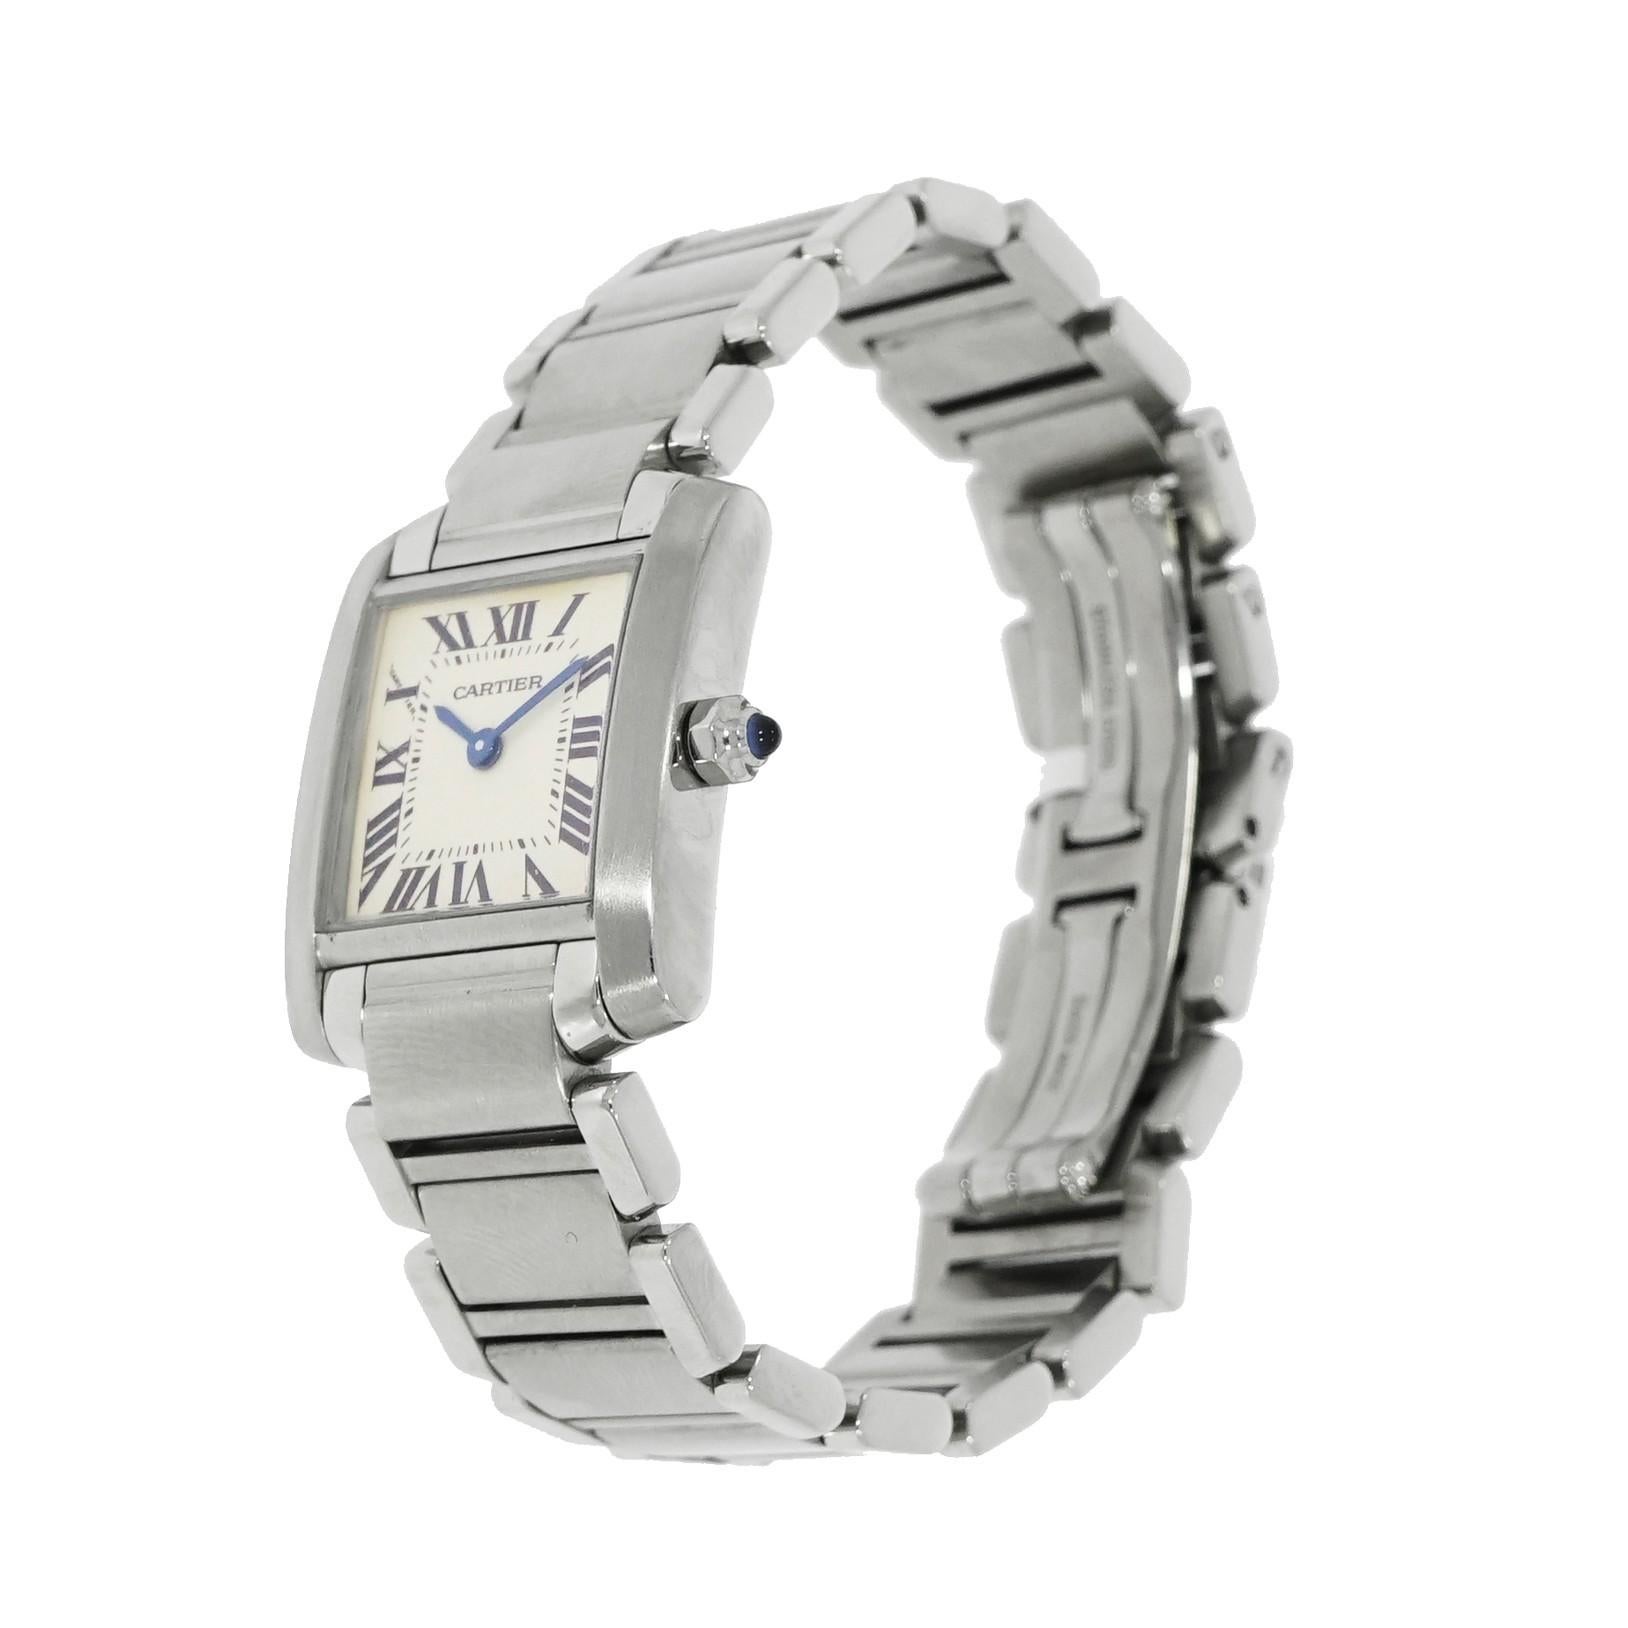 Pre-owned in very good condition Cartier Tank Francaise PM 20.25X 25mm case in stainless steel case, quartz movement, scratch resistant sapphire crystal, silver dial with roman numeral hour markers, blue spinel cabochon crown, stainless steel